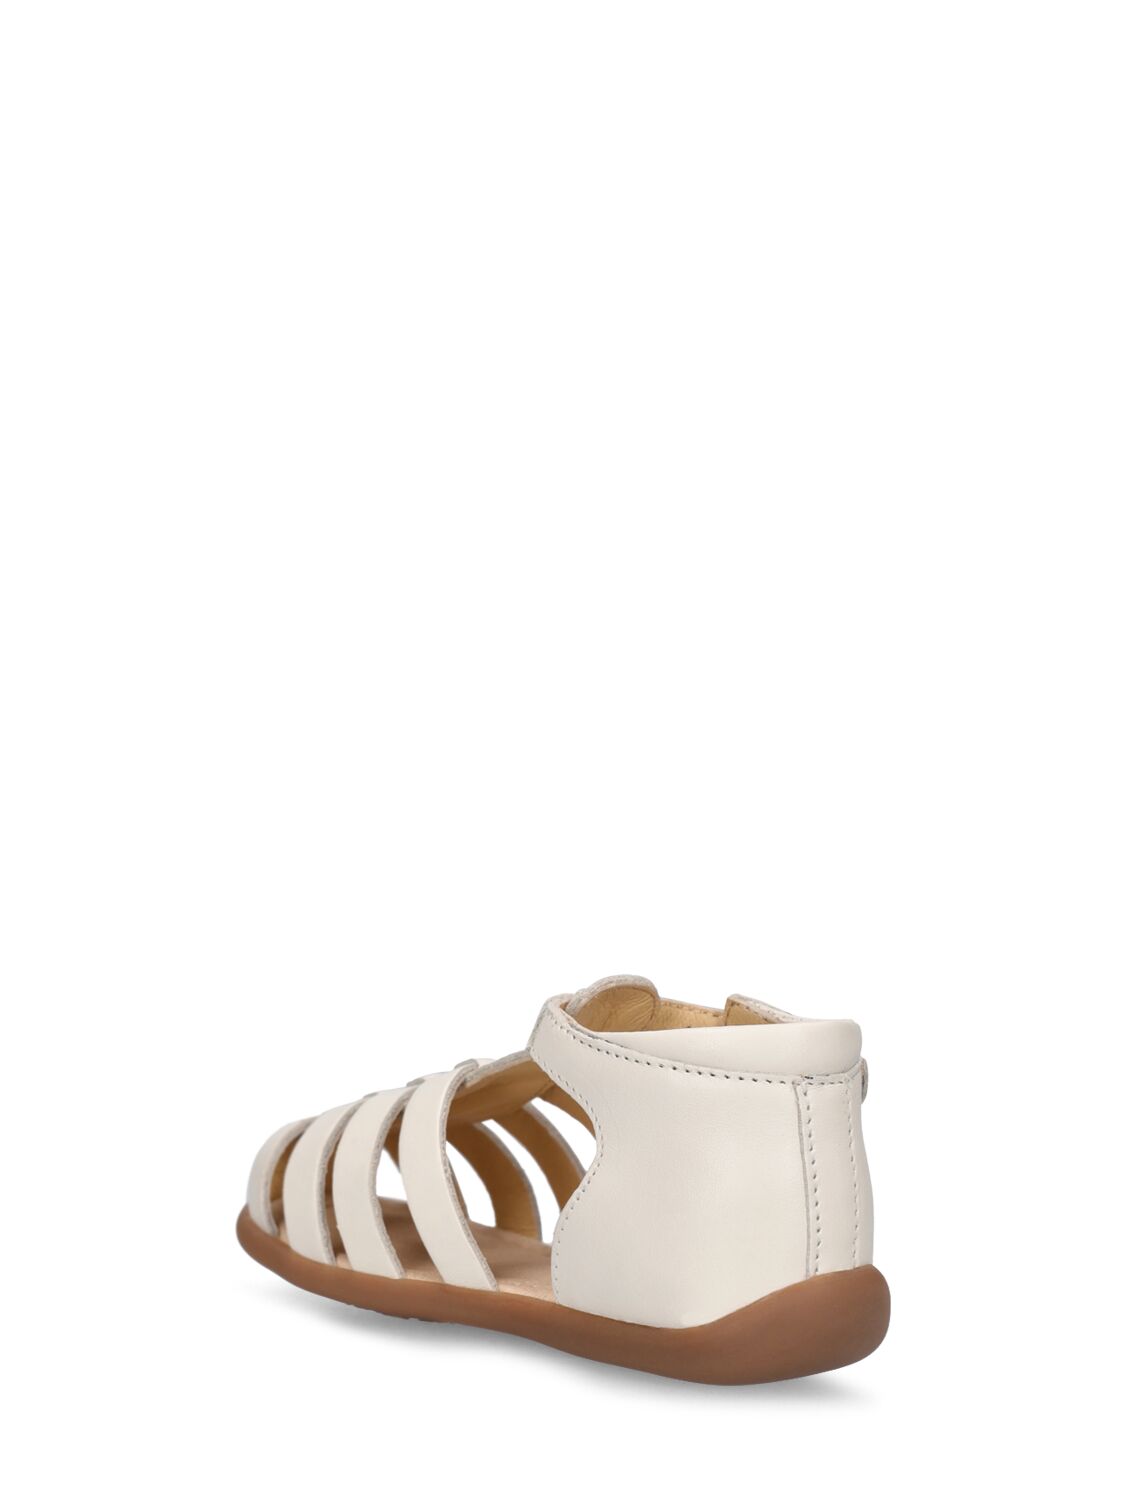 Shop Pom D'api Nappa Leather Sandals In Off-white